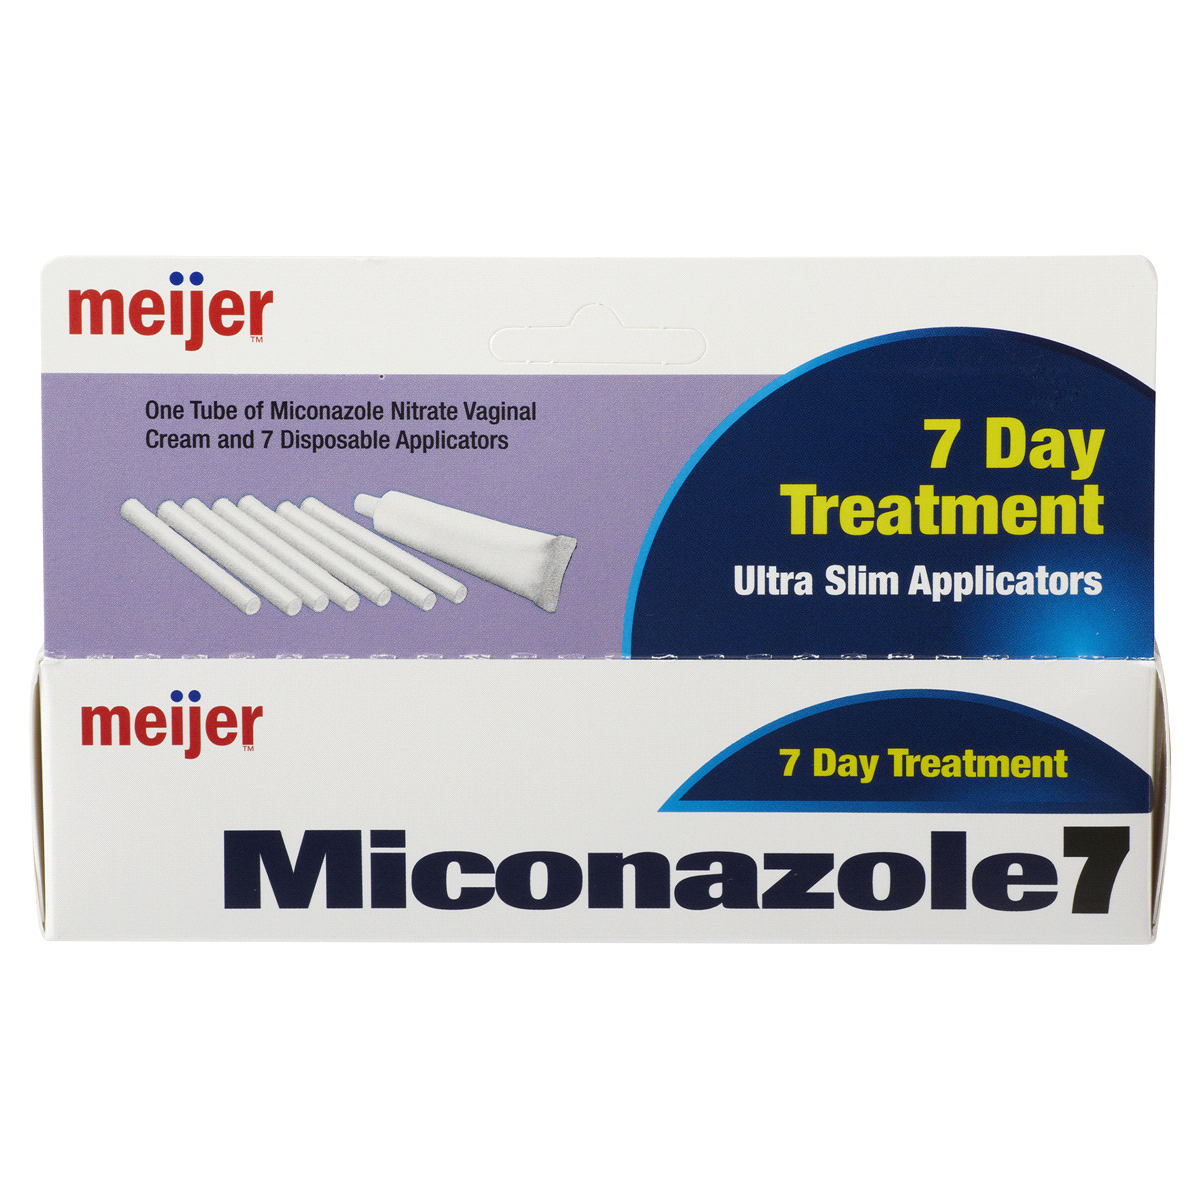 slide 2 of 4, Meijer Miconazole 7 Combo Pack: Disposable Applicators, 1 ct